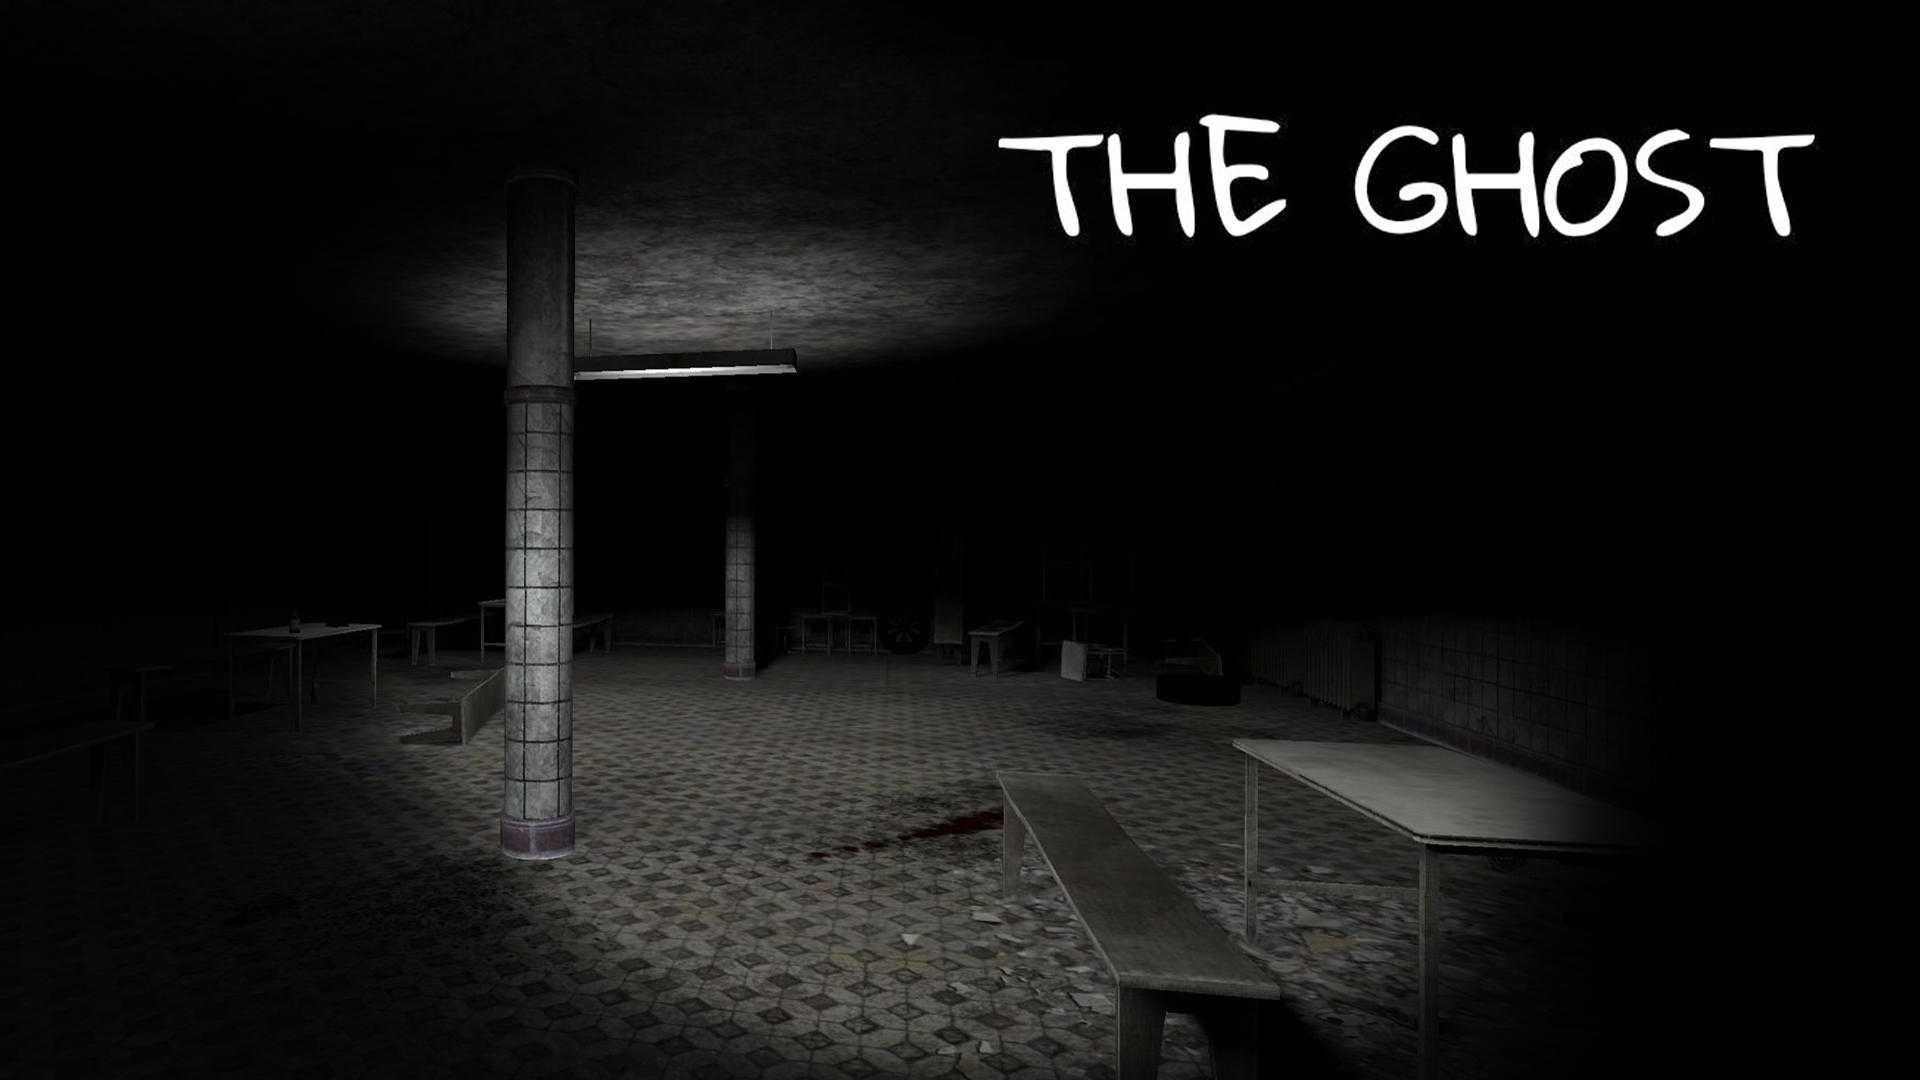 The Ghost 1.37.2 APK MOD [Ghost NoAttack, Full Battery, Unlocked Outfits]